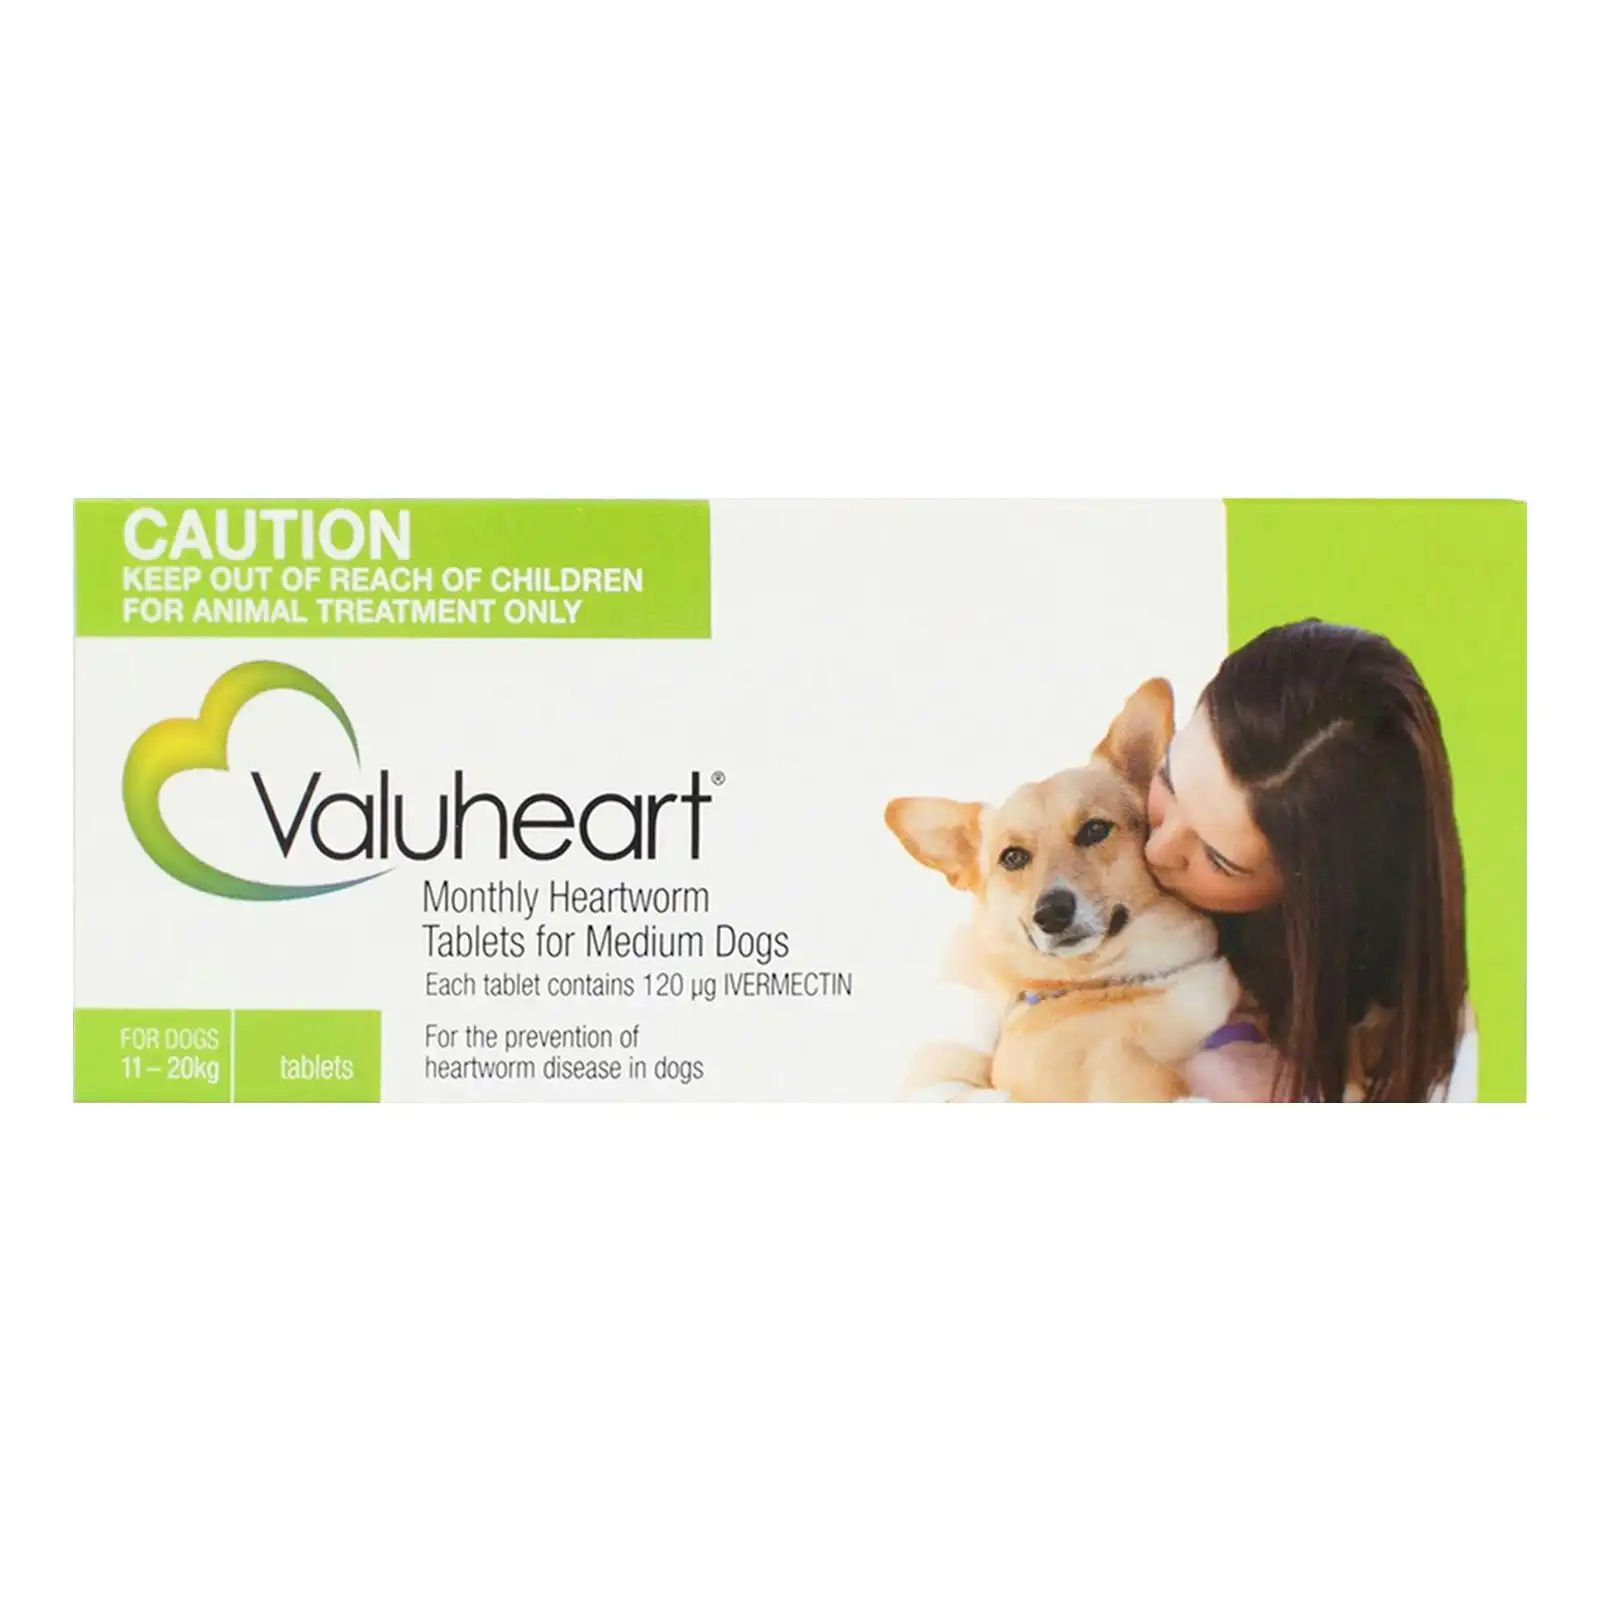 Valuheart Heartworm Tablets For Medium Dogs 11 to 20 Kg (Green) 6 Tablets